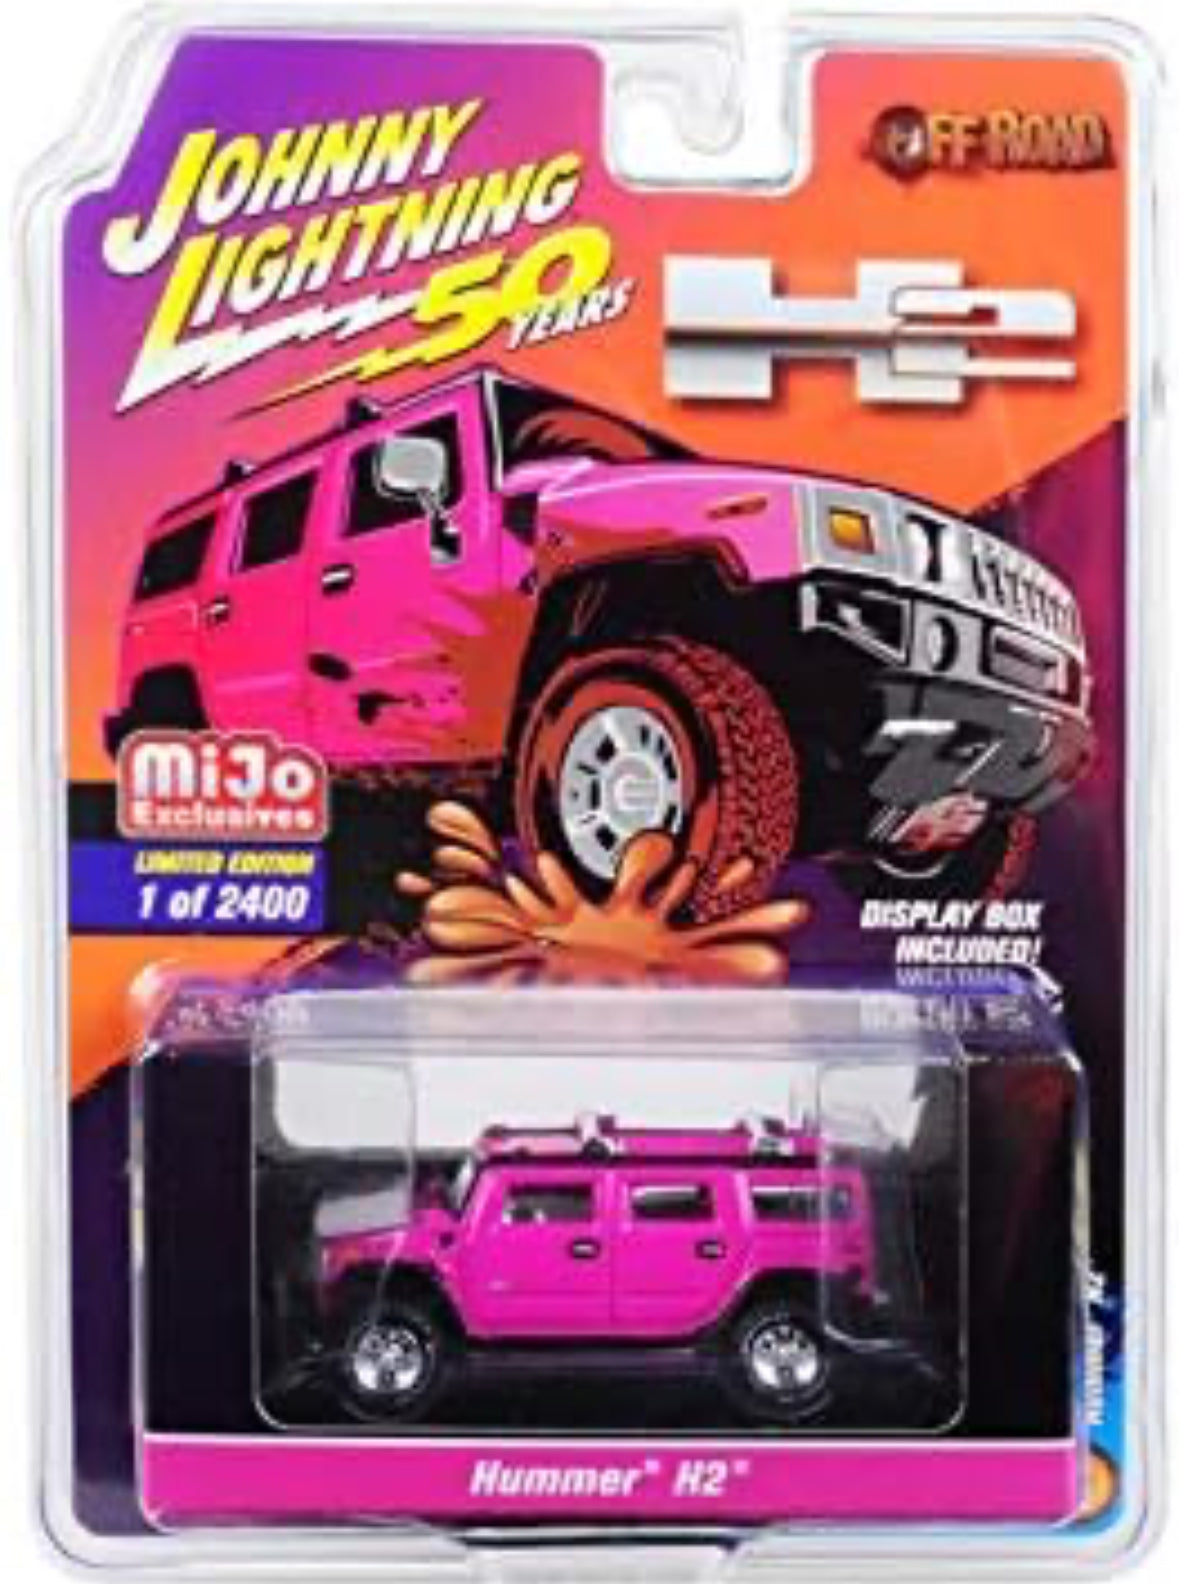 1/64 JOHNNY LIGHTNING 50 YEARS HUMMER H2 PINK - OFF ROAD